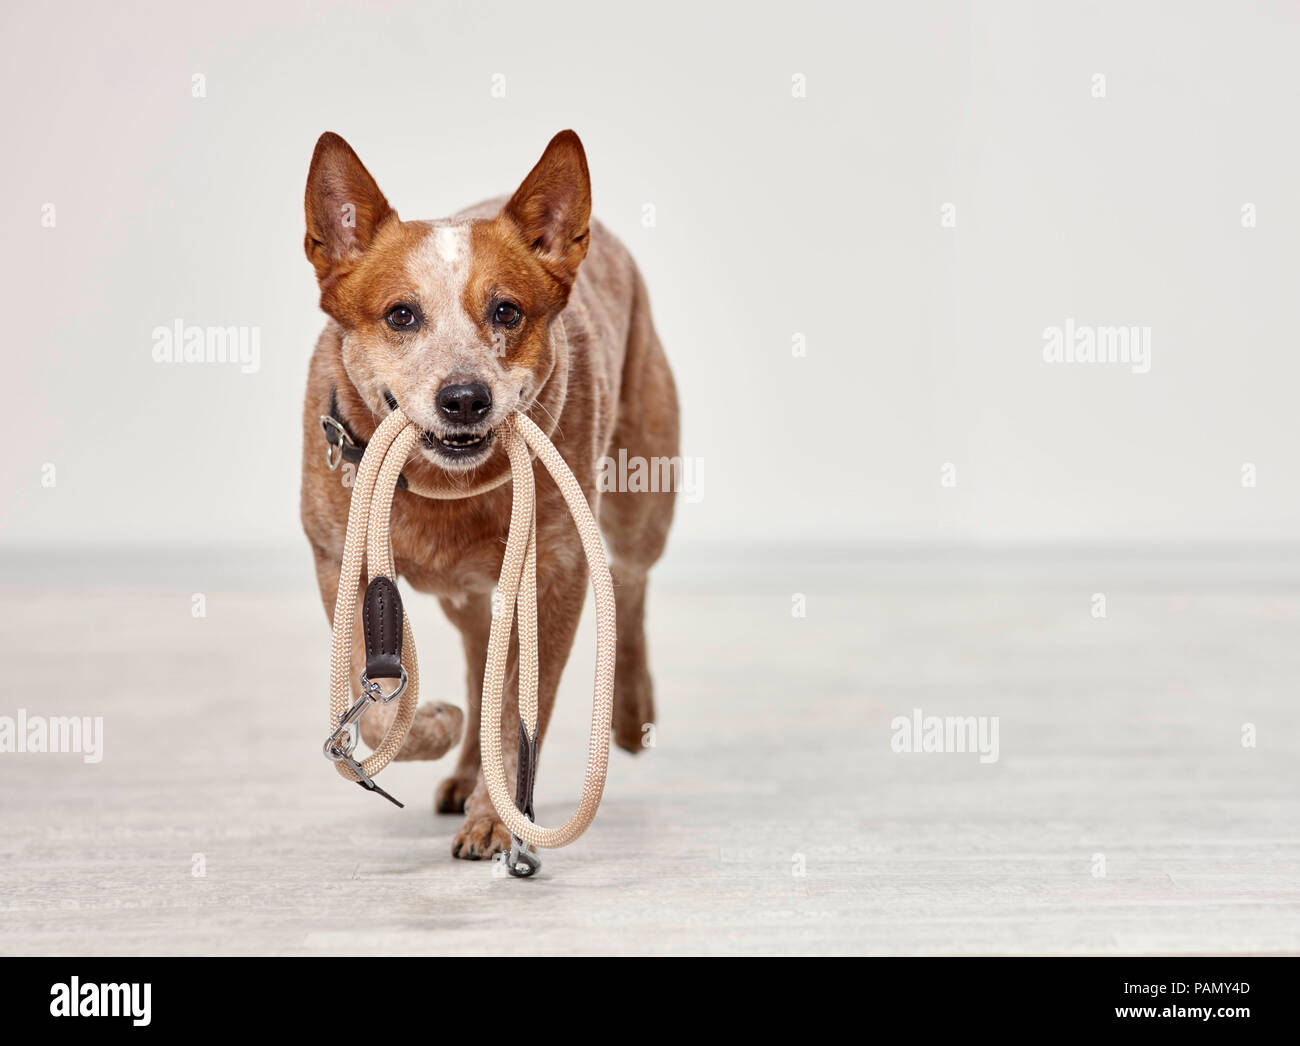 Australian Cattle Dog carries a leash in its mouth. Germany.. Stock Photo